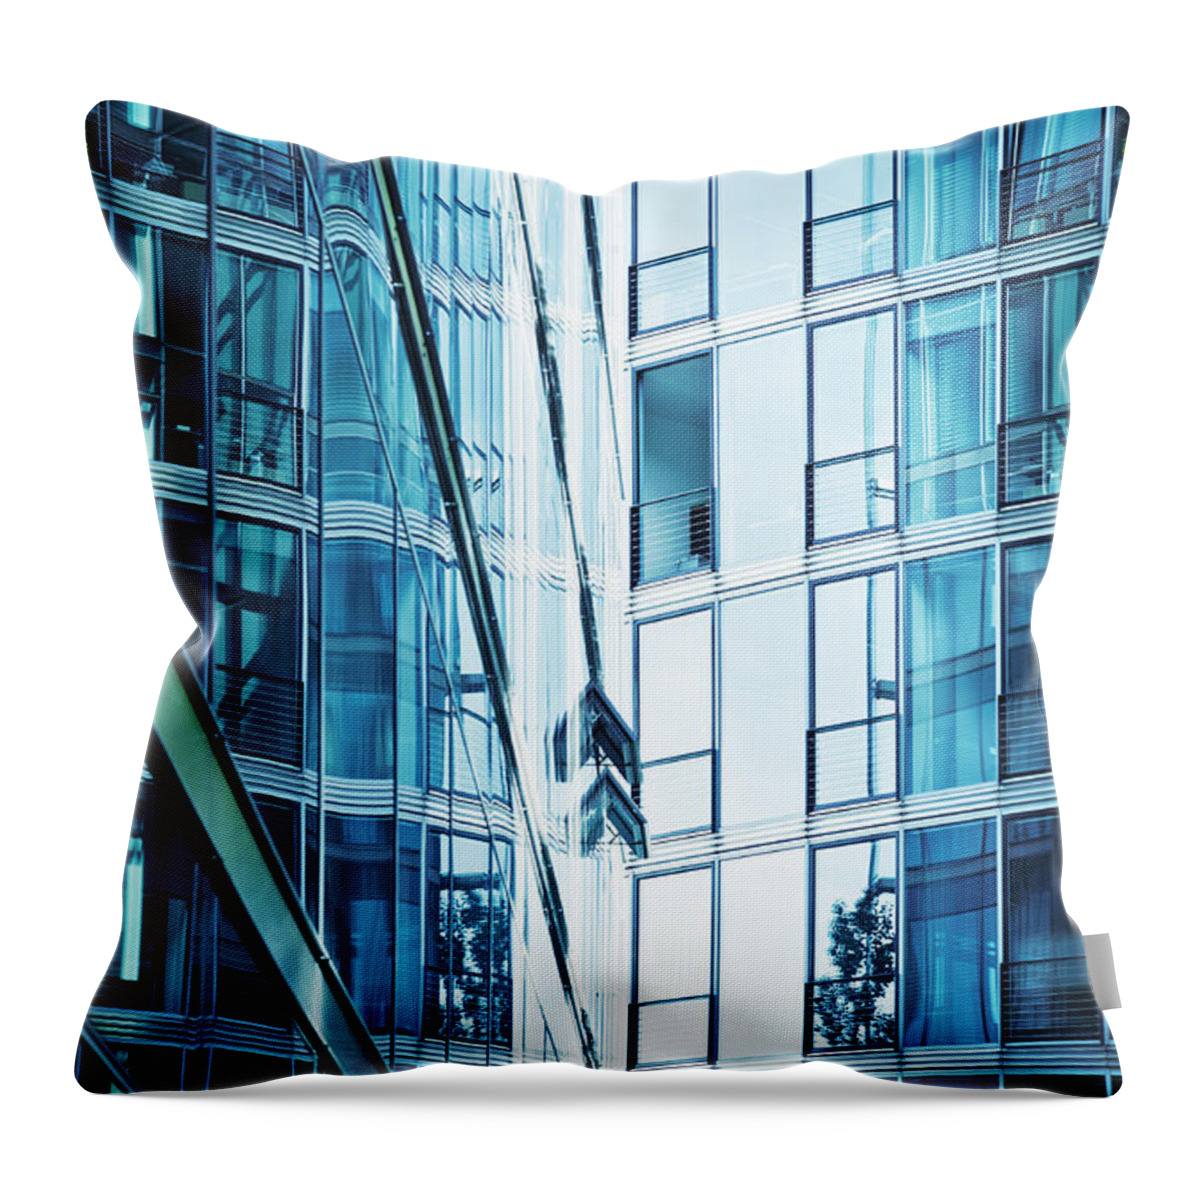 Corporate Business Throw Pillow featuring the photograph Modern Corporate Building by Tomml